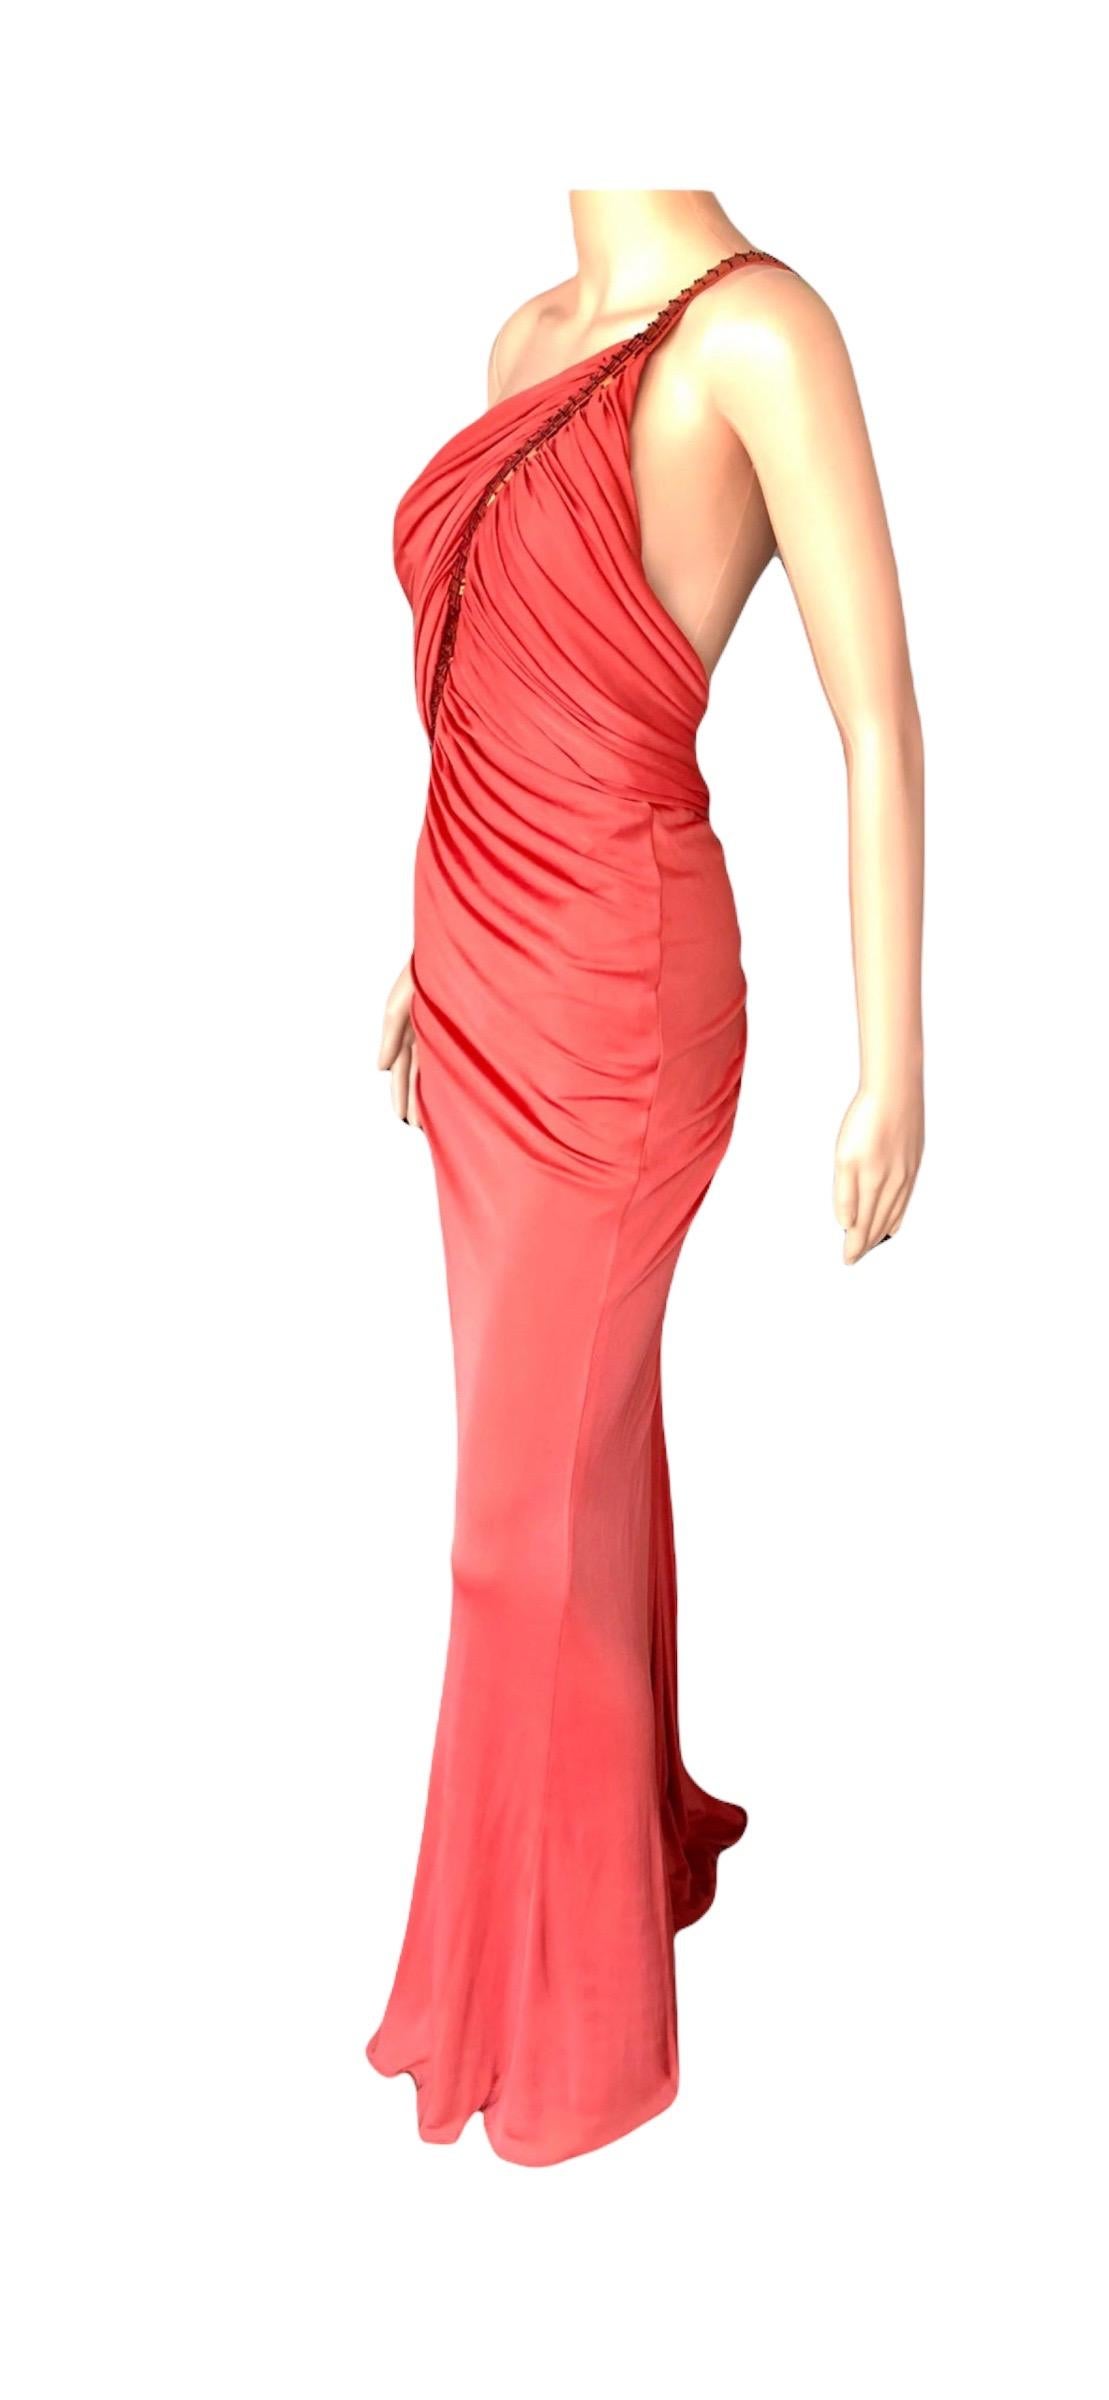 Gianni Versace S/S 2001 Runway Embellished Backless Evening Dress Gown For Sale 13